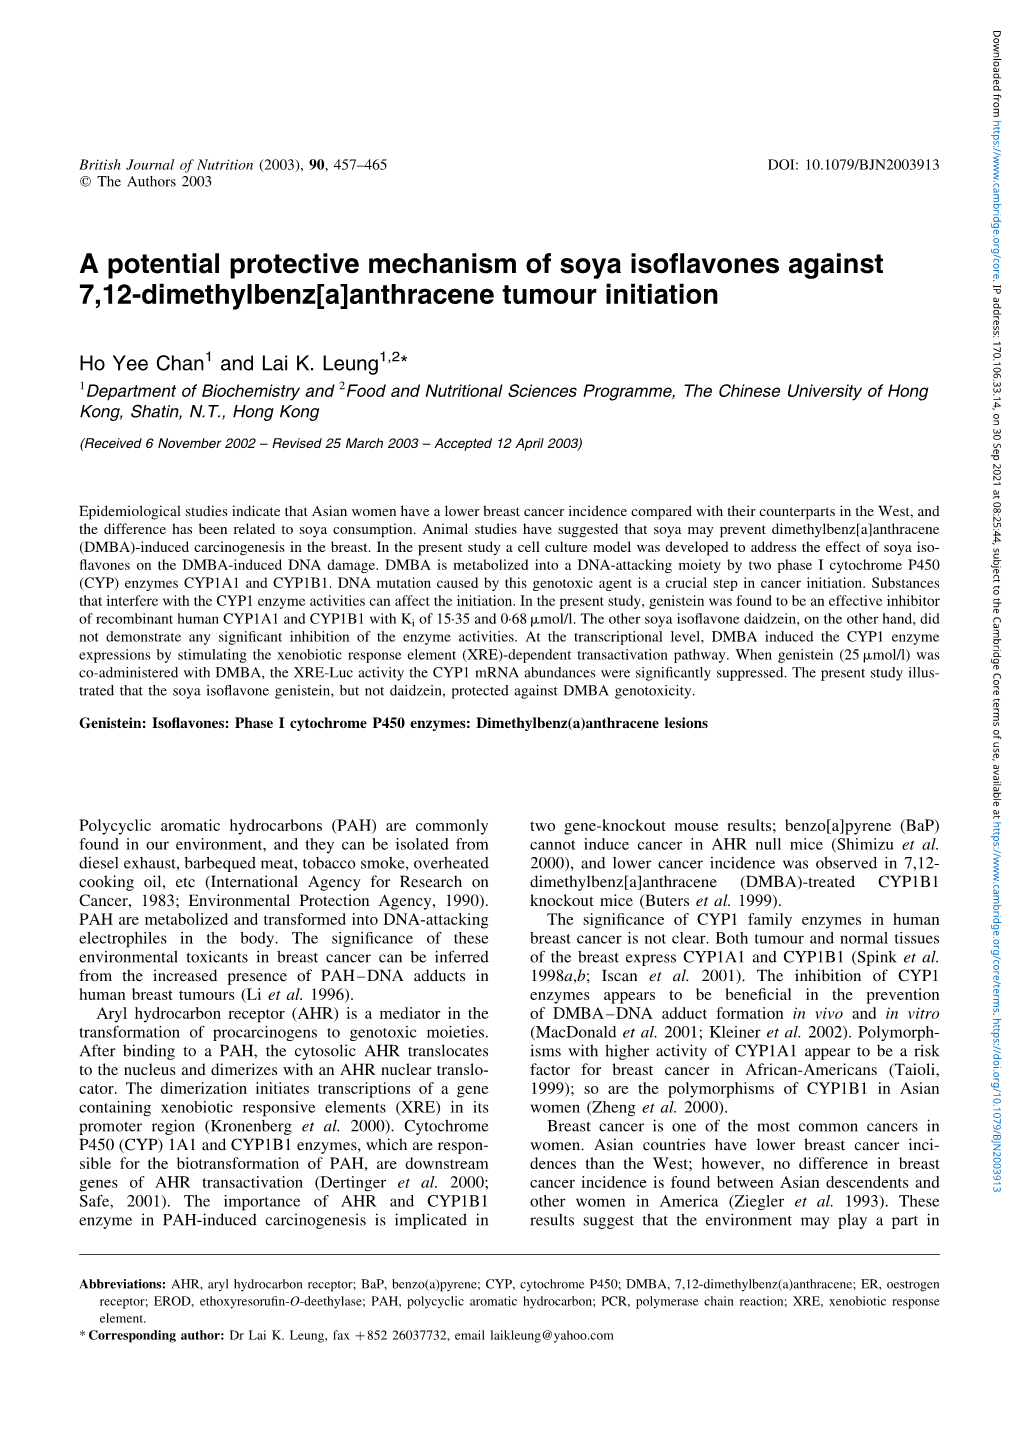 A Potential Protective Mechanism of Soya Isoflavones Against 7,12